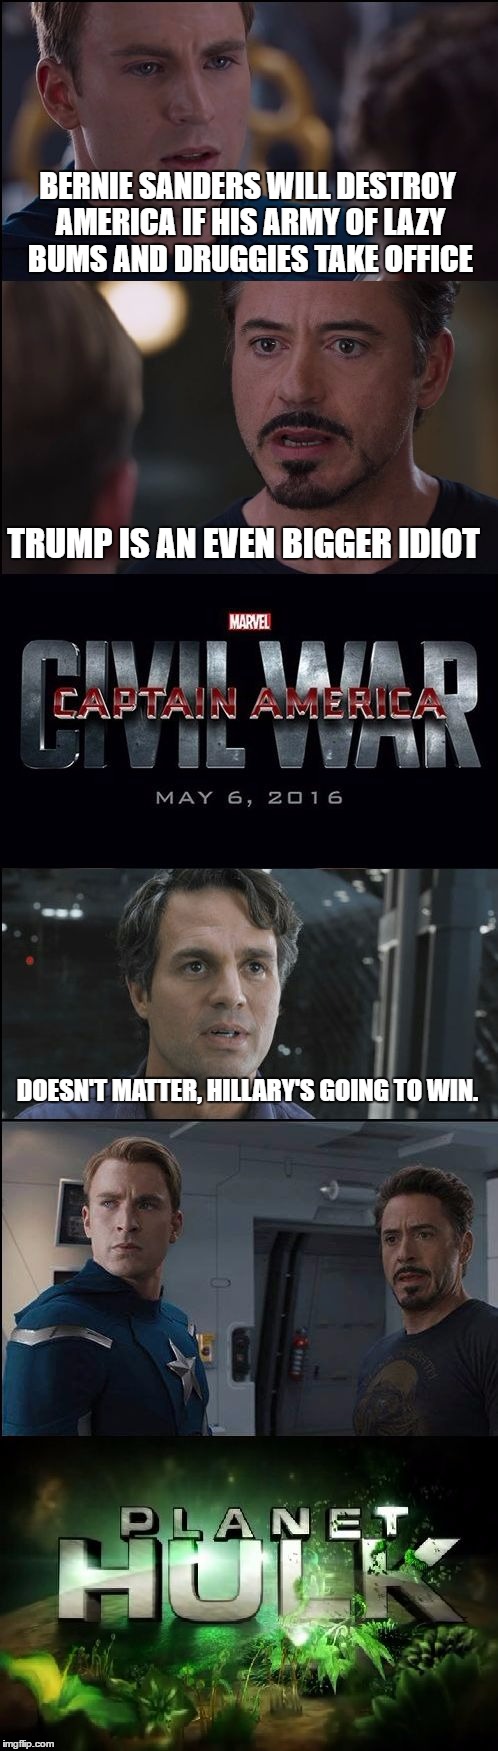 Civil War/Planet Hulk | BERNIE SANDERS WILL DESTROY AMERICA IF HIS ARMY OF LAZY BUMS AND DRUGGIES TAKE OFFICE; TRUMP IS AN EVEN BIGGER IDIOT; DOESN'T MATTER, HILLARY'S GOING TO WIN. | image tagged in civil war/planet hulk,donald trump,hillary clinton,bernie sanders | made w/ Imgflip meme maker